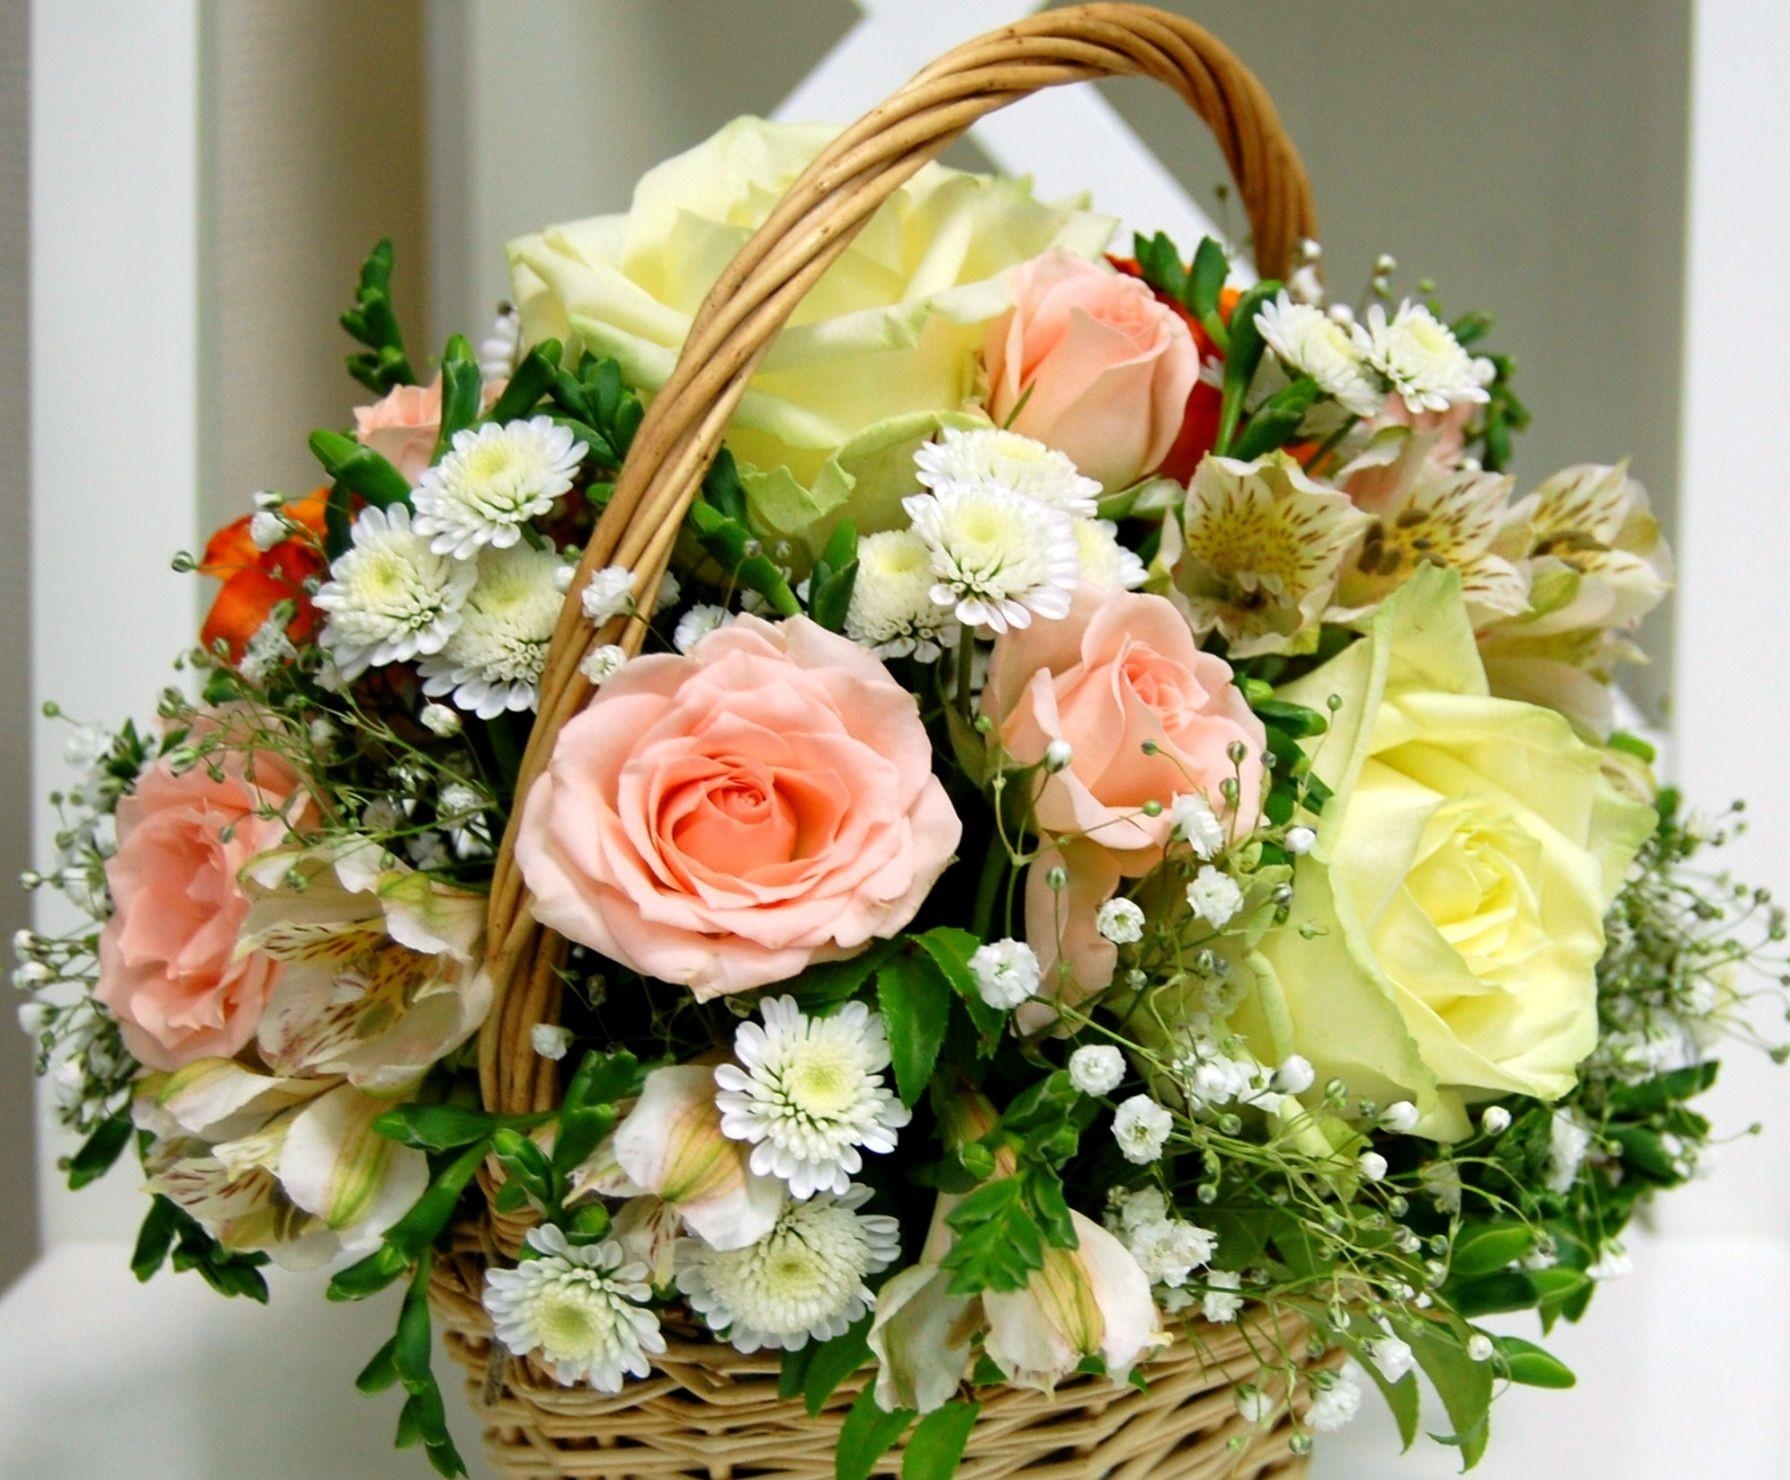 Basket roses, flowers, handsomely, gypsophilus Free Stock Photos